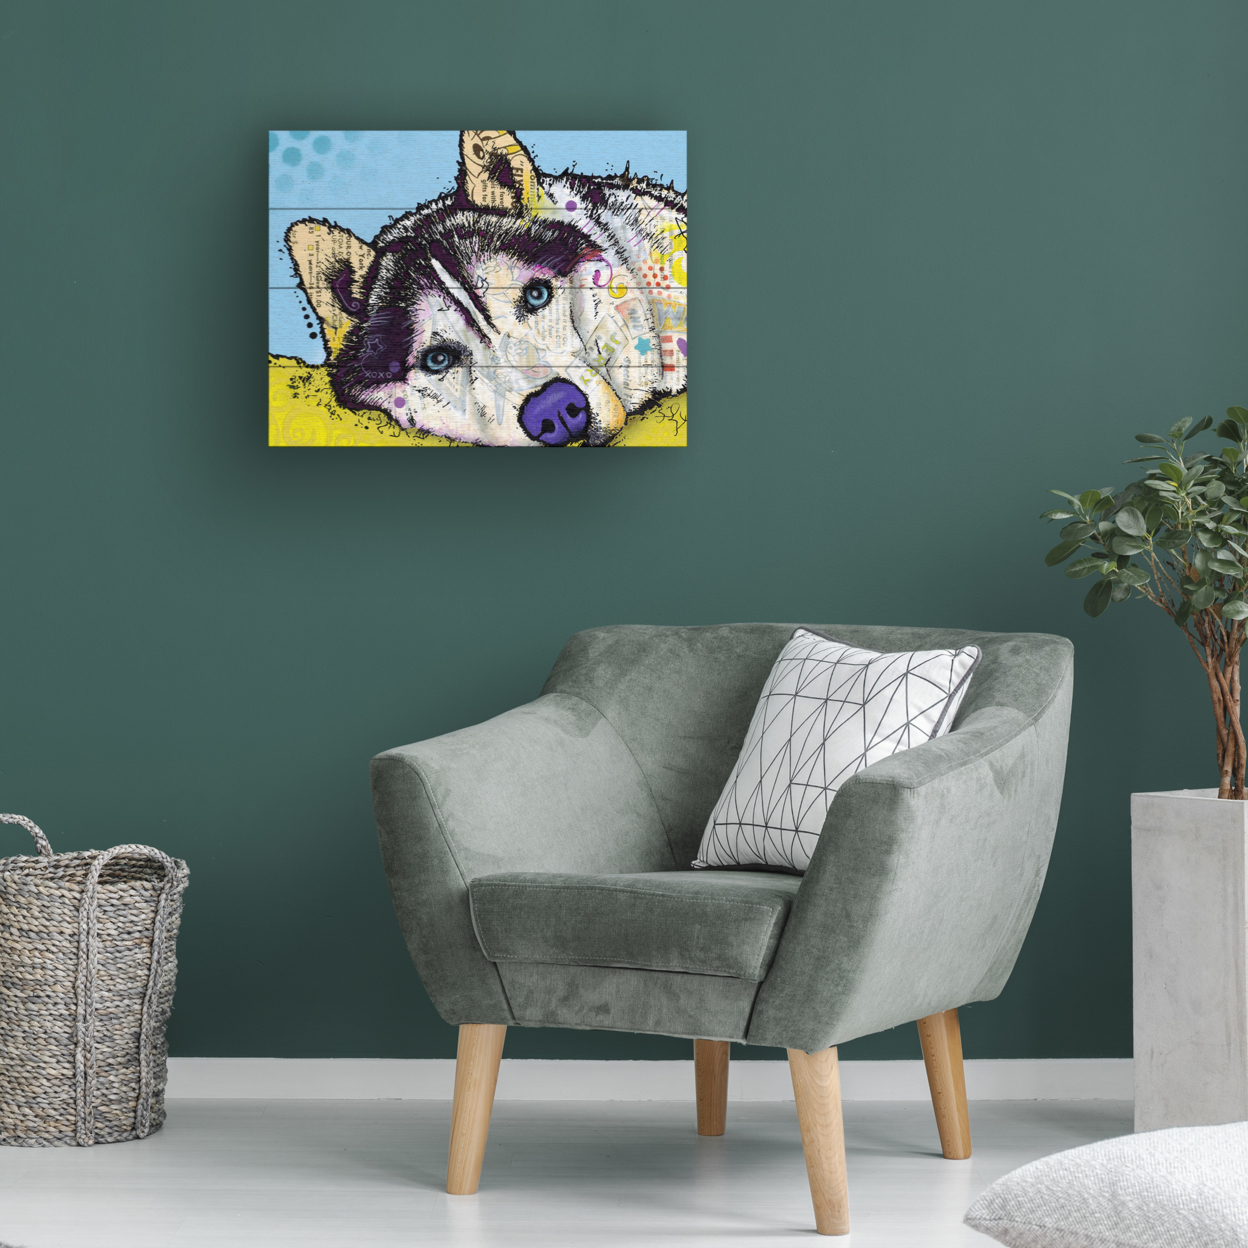 Wall Art 12 X 16 Inches Titled Siberian Husky II Ready To Hang Printed On Wooden Planks